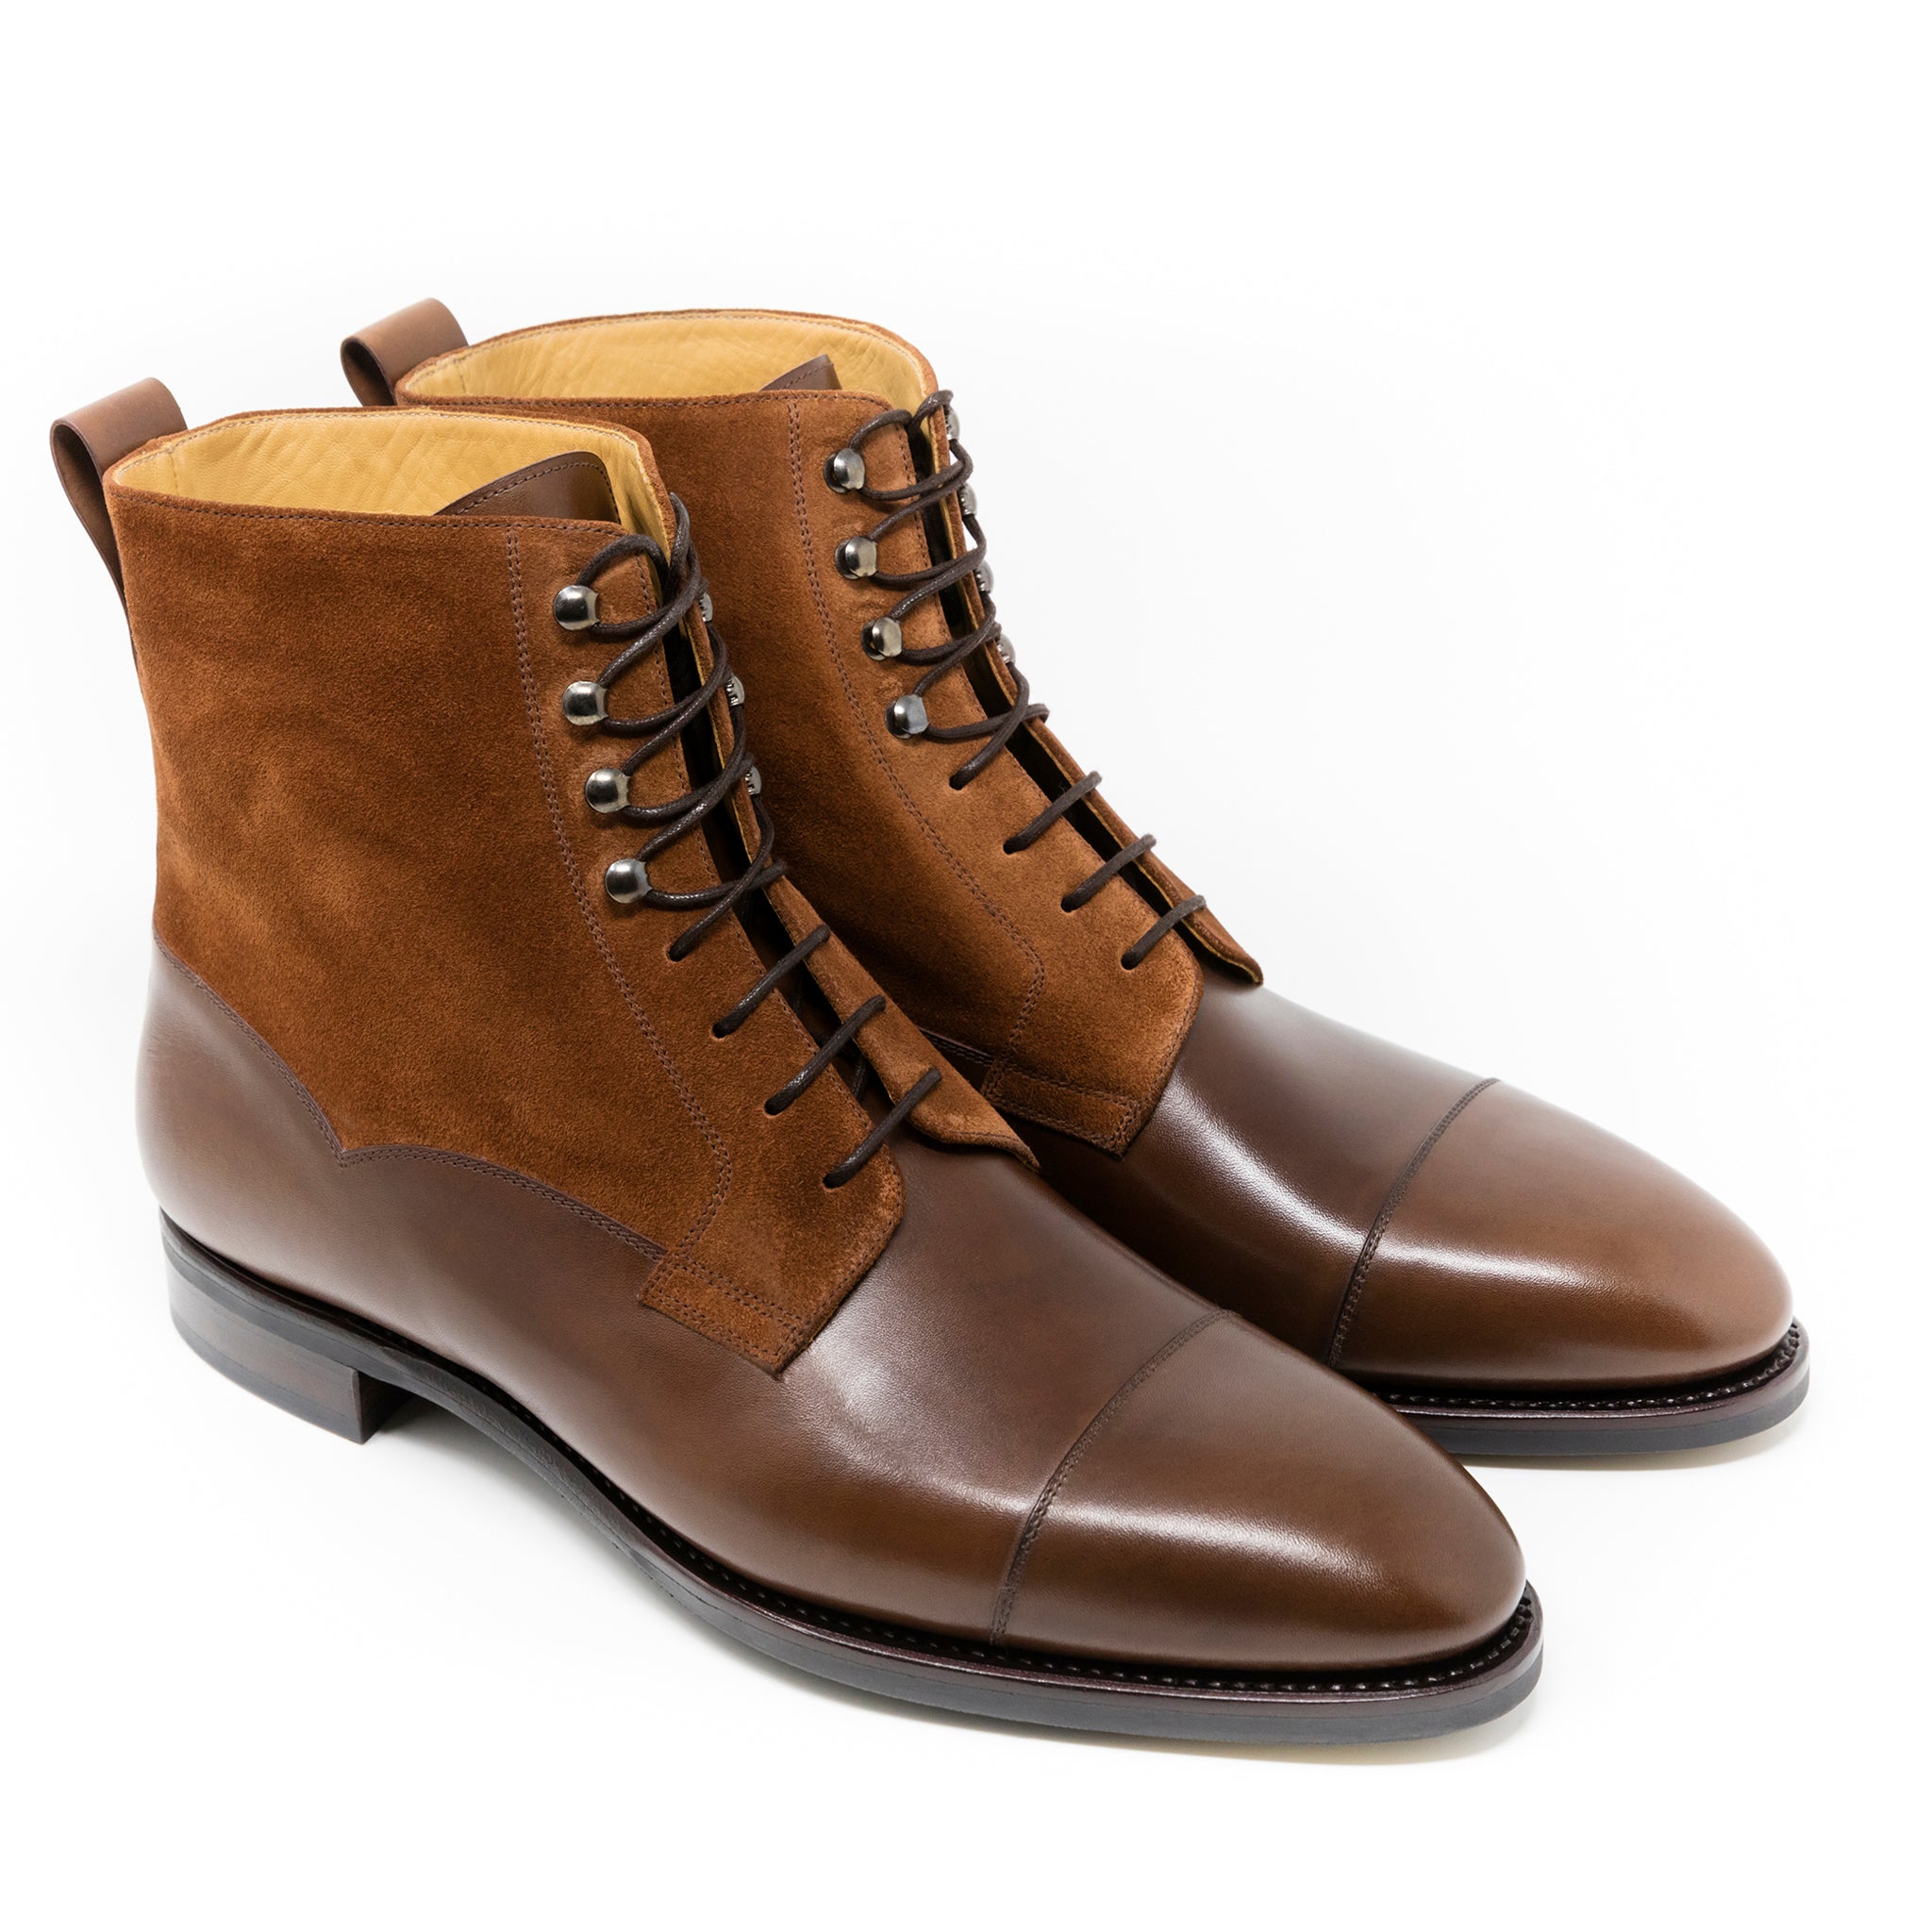 TLB Mallorca | Men's Boots made of leather | Men's Shoes Artista ...